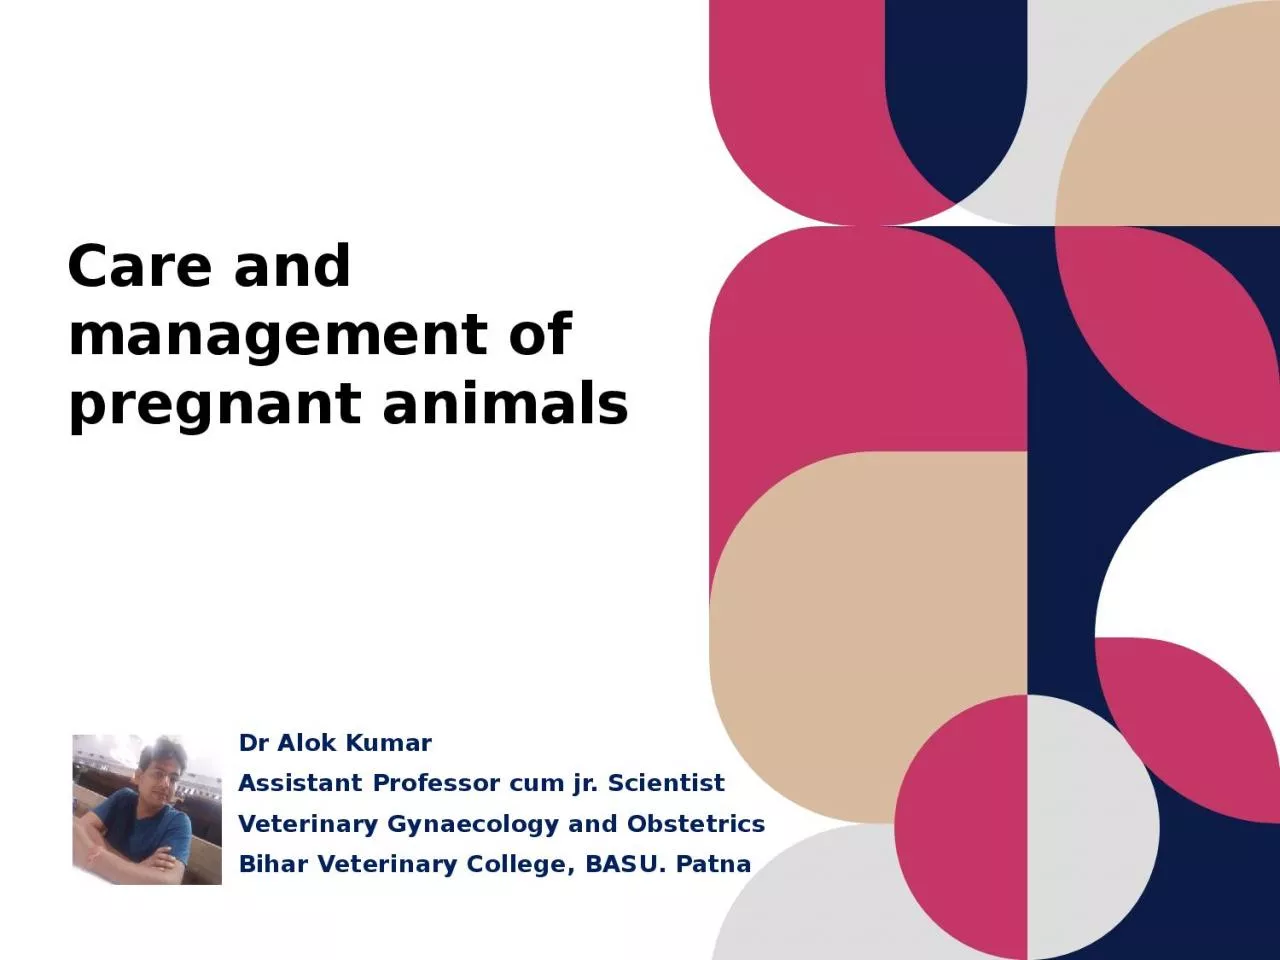 Care and management of pregnant animals